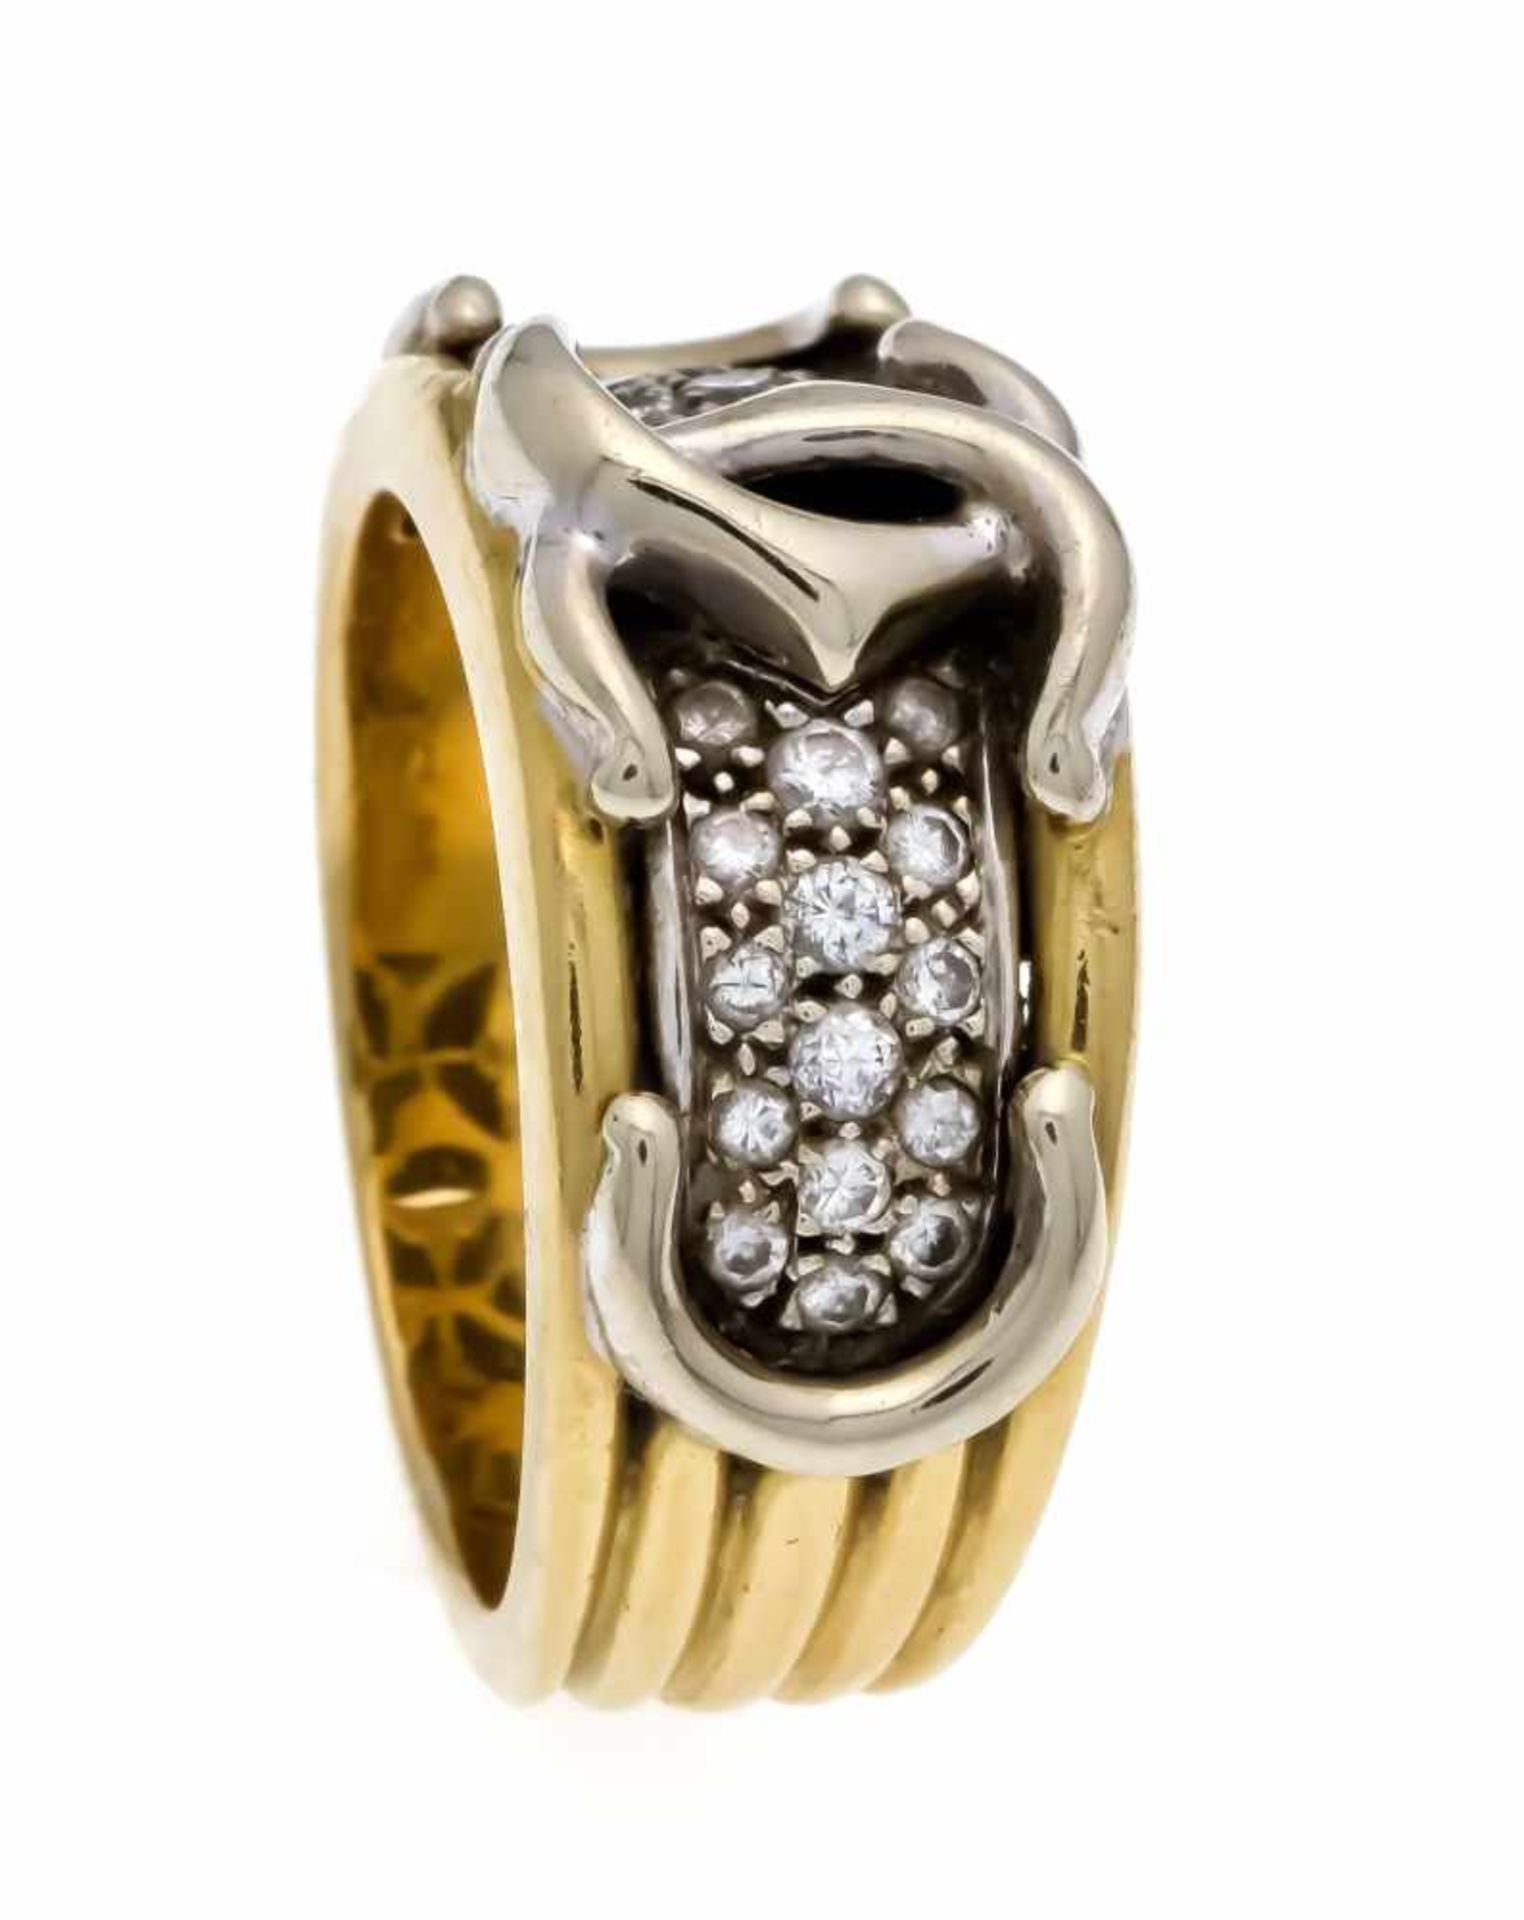 Brilliant ring GG / WG 750/000 with 30 diamonds, total 0.40 ct W / SI, RG 58, 15.8 g